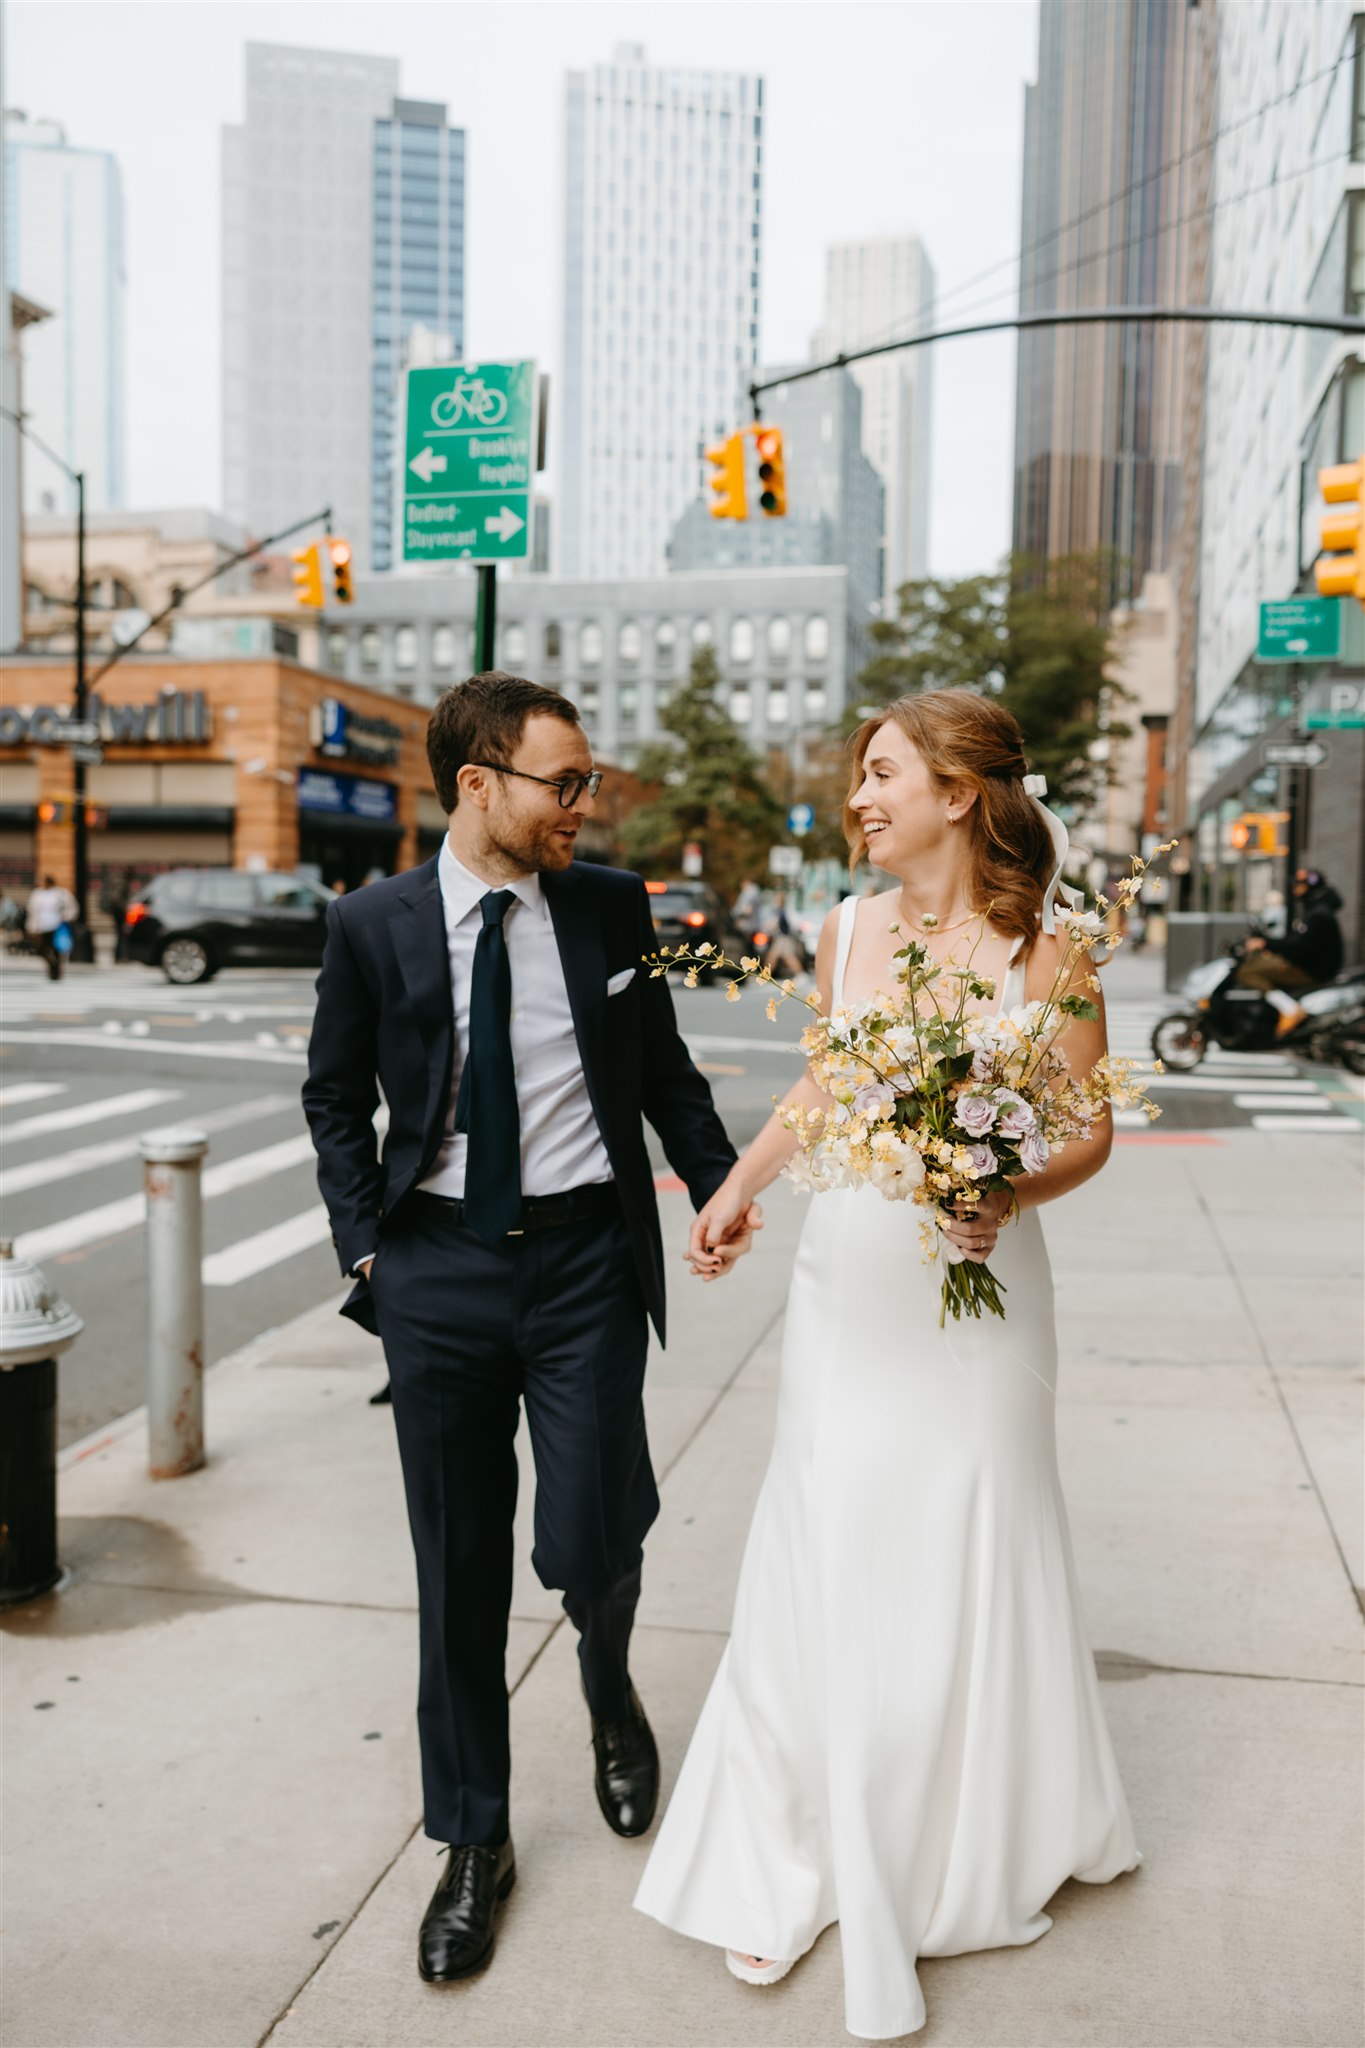 A bride and groom smiling at each other while walking across a city street, the bride holding a bouquet, and city buildings in the background.